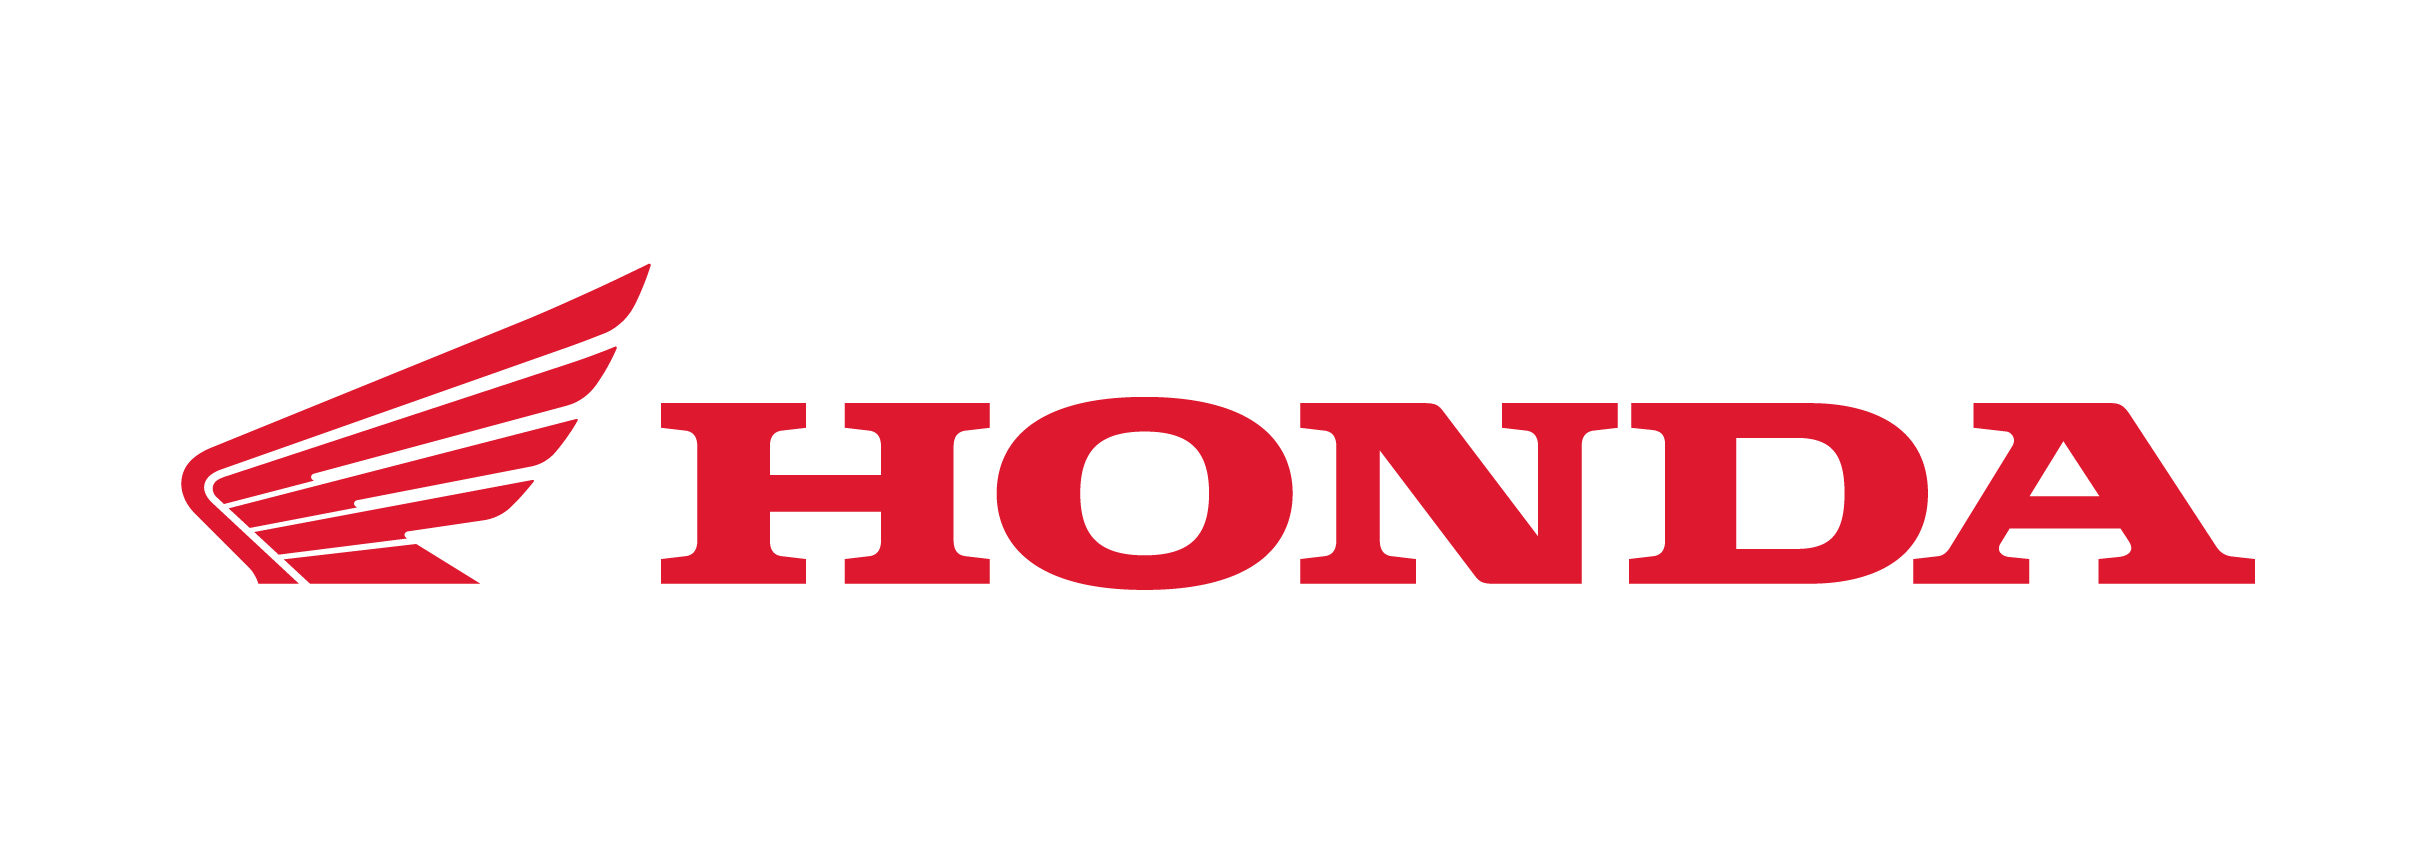 New Honda Motorcycle Logo - Celebration Sale MCN Dealer of the Year 2016 - Saltire Motorcycles